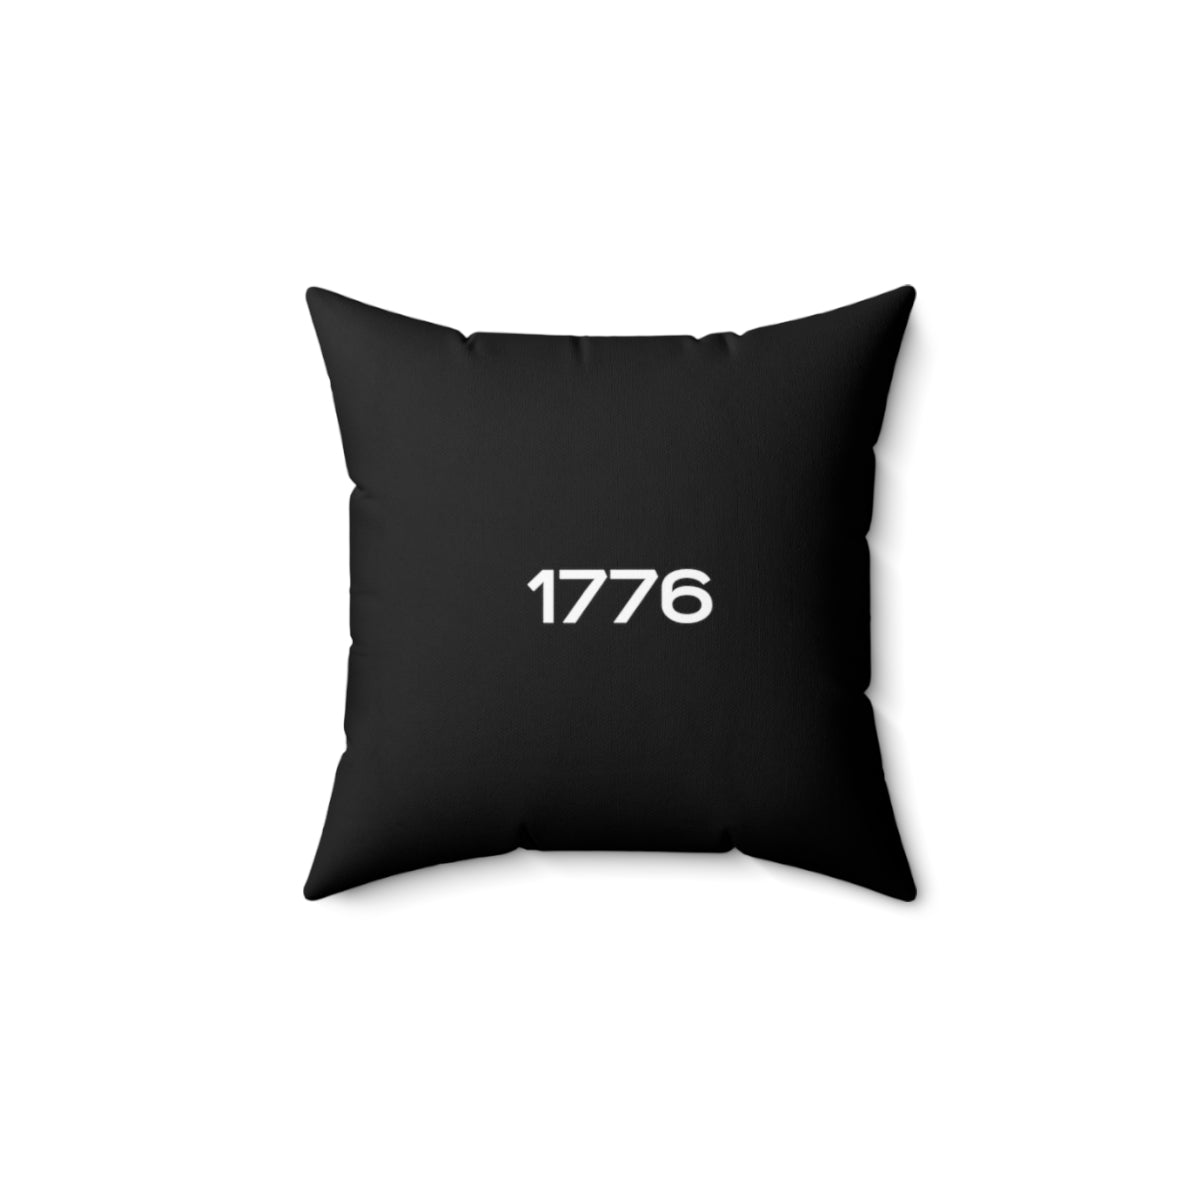 Hello Freedom Decorative Pillow - Freedom First Supply